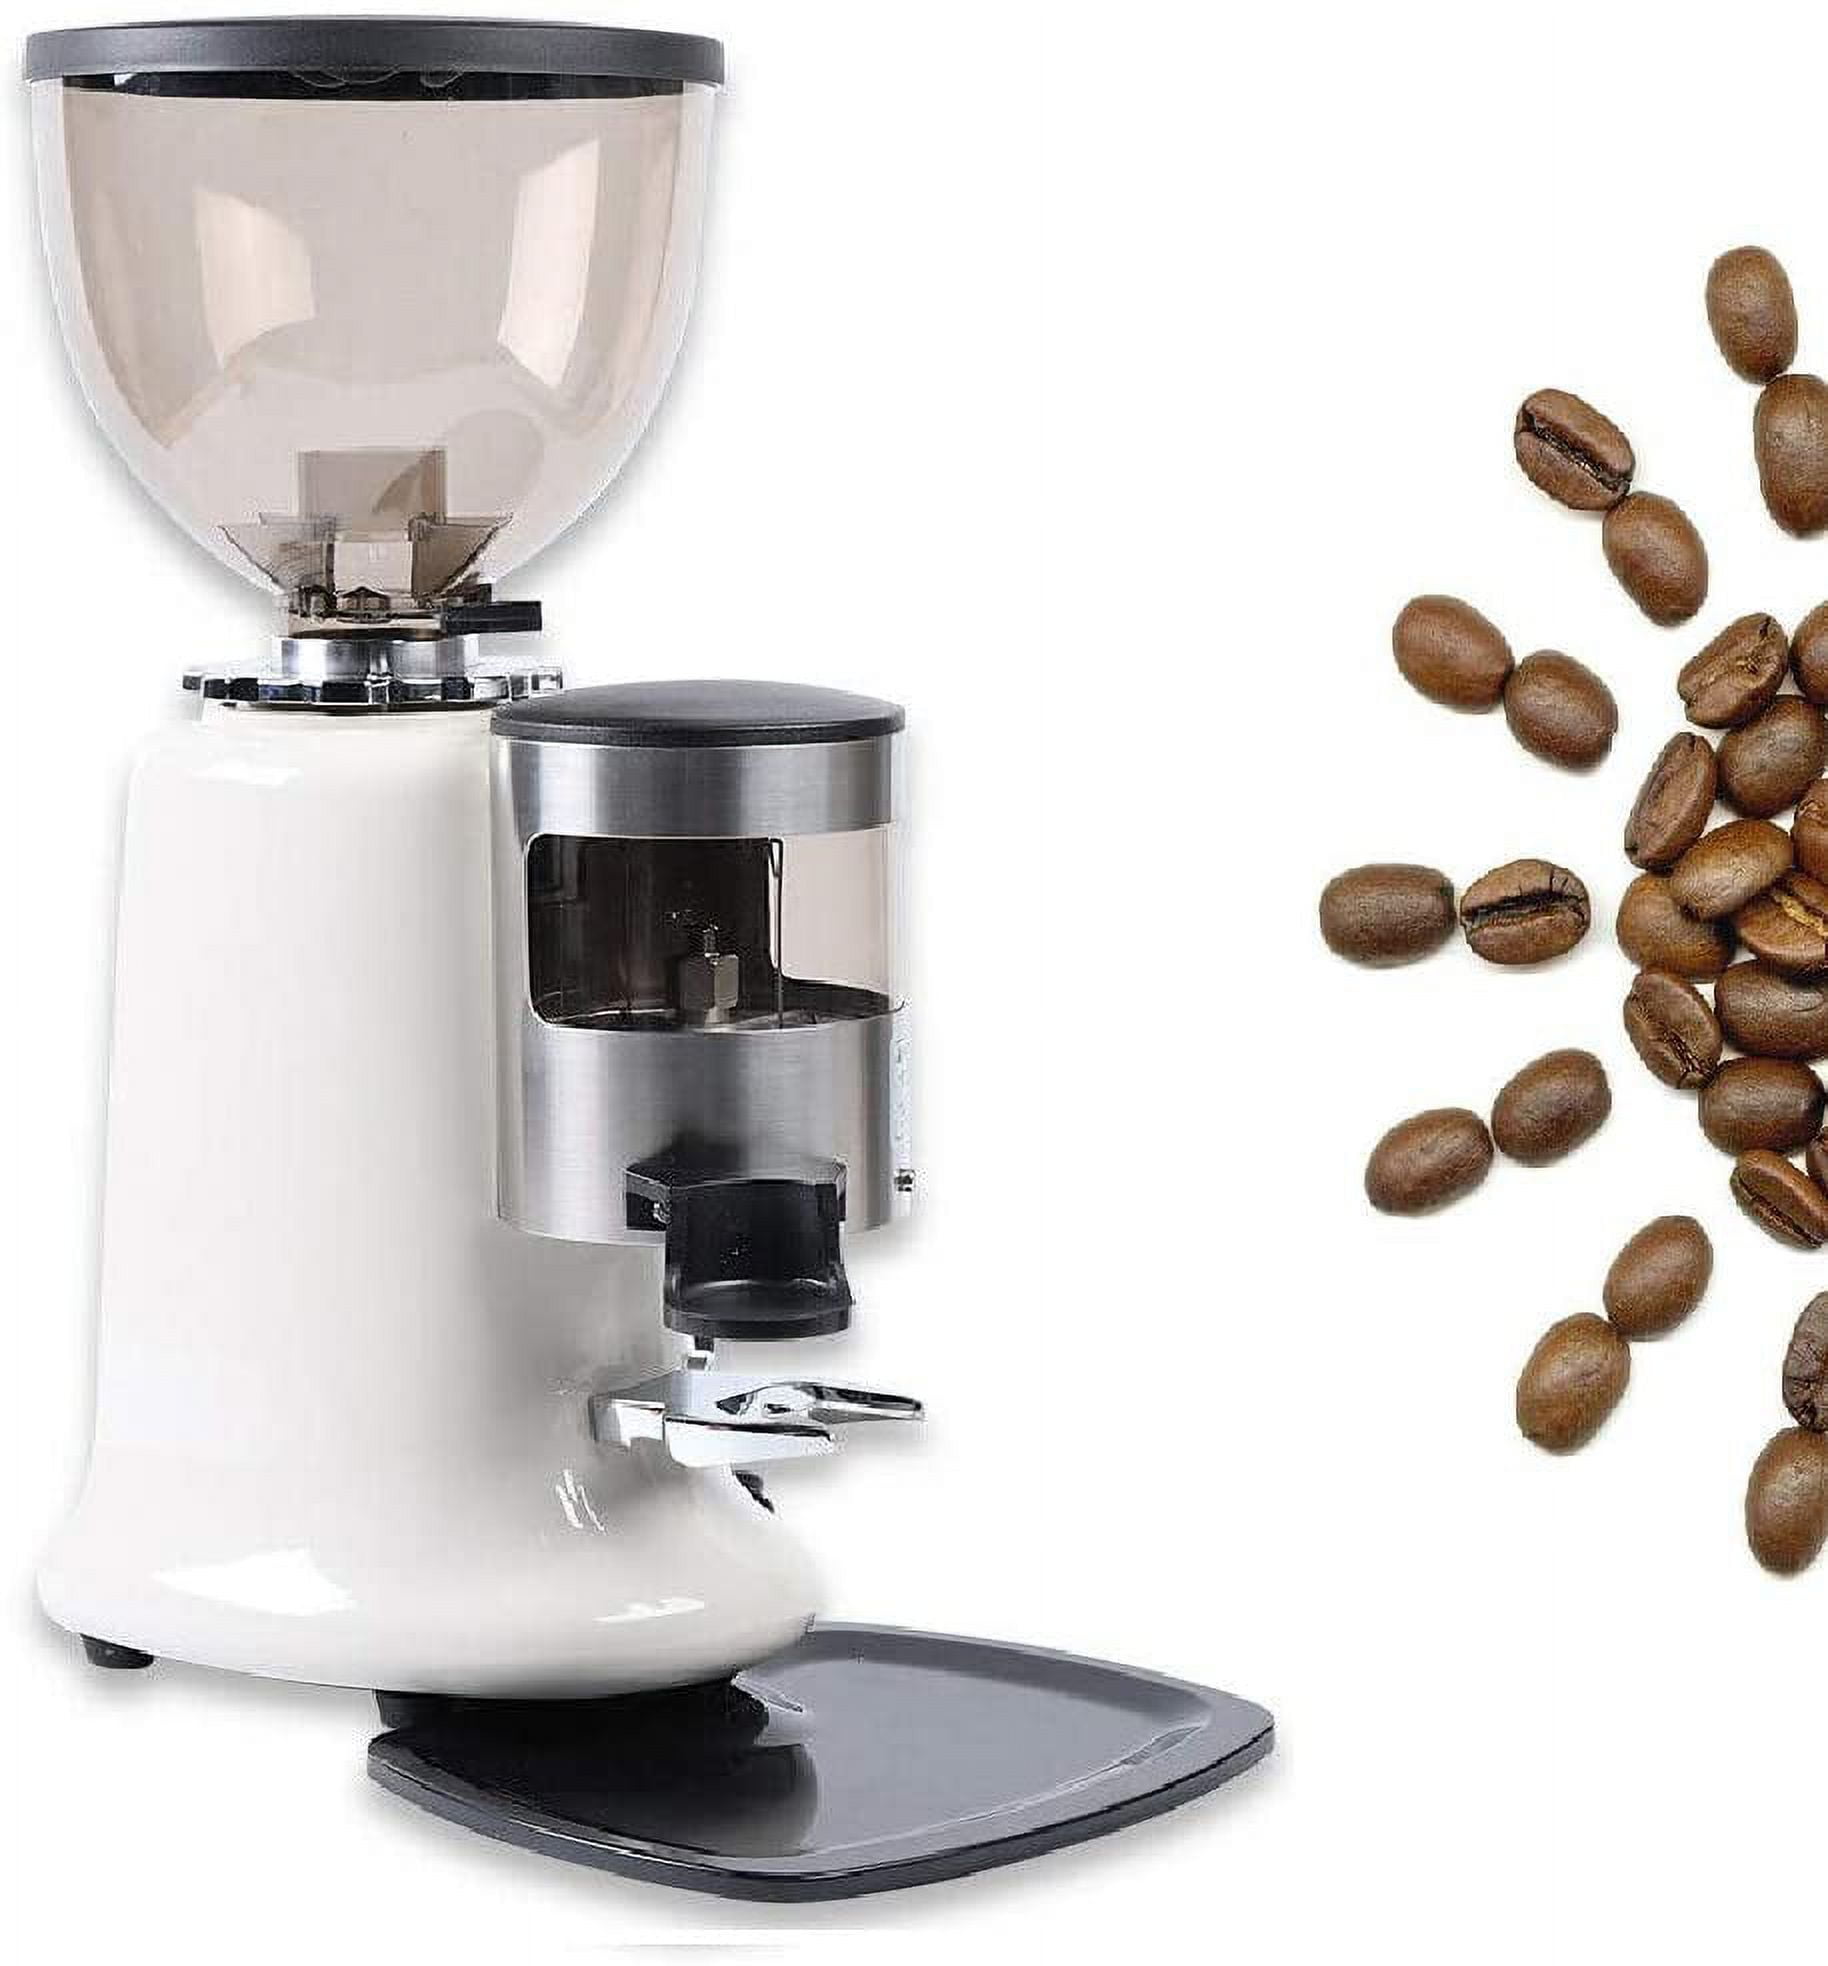 110V 350W Commercial Stainless Coffee Grinder Electric Grind